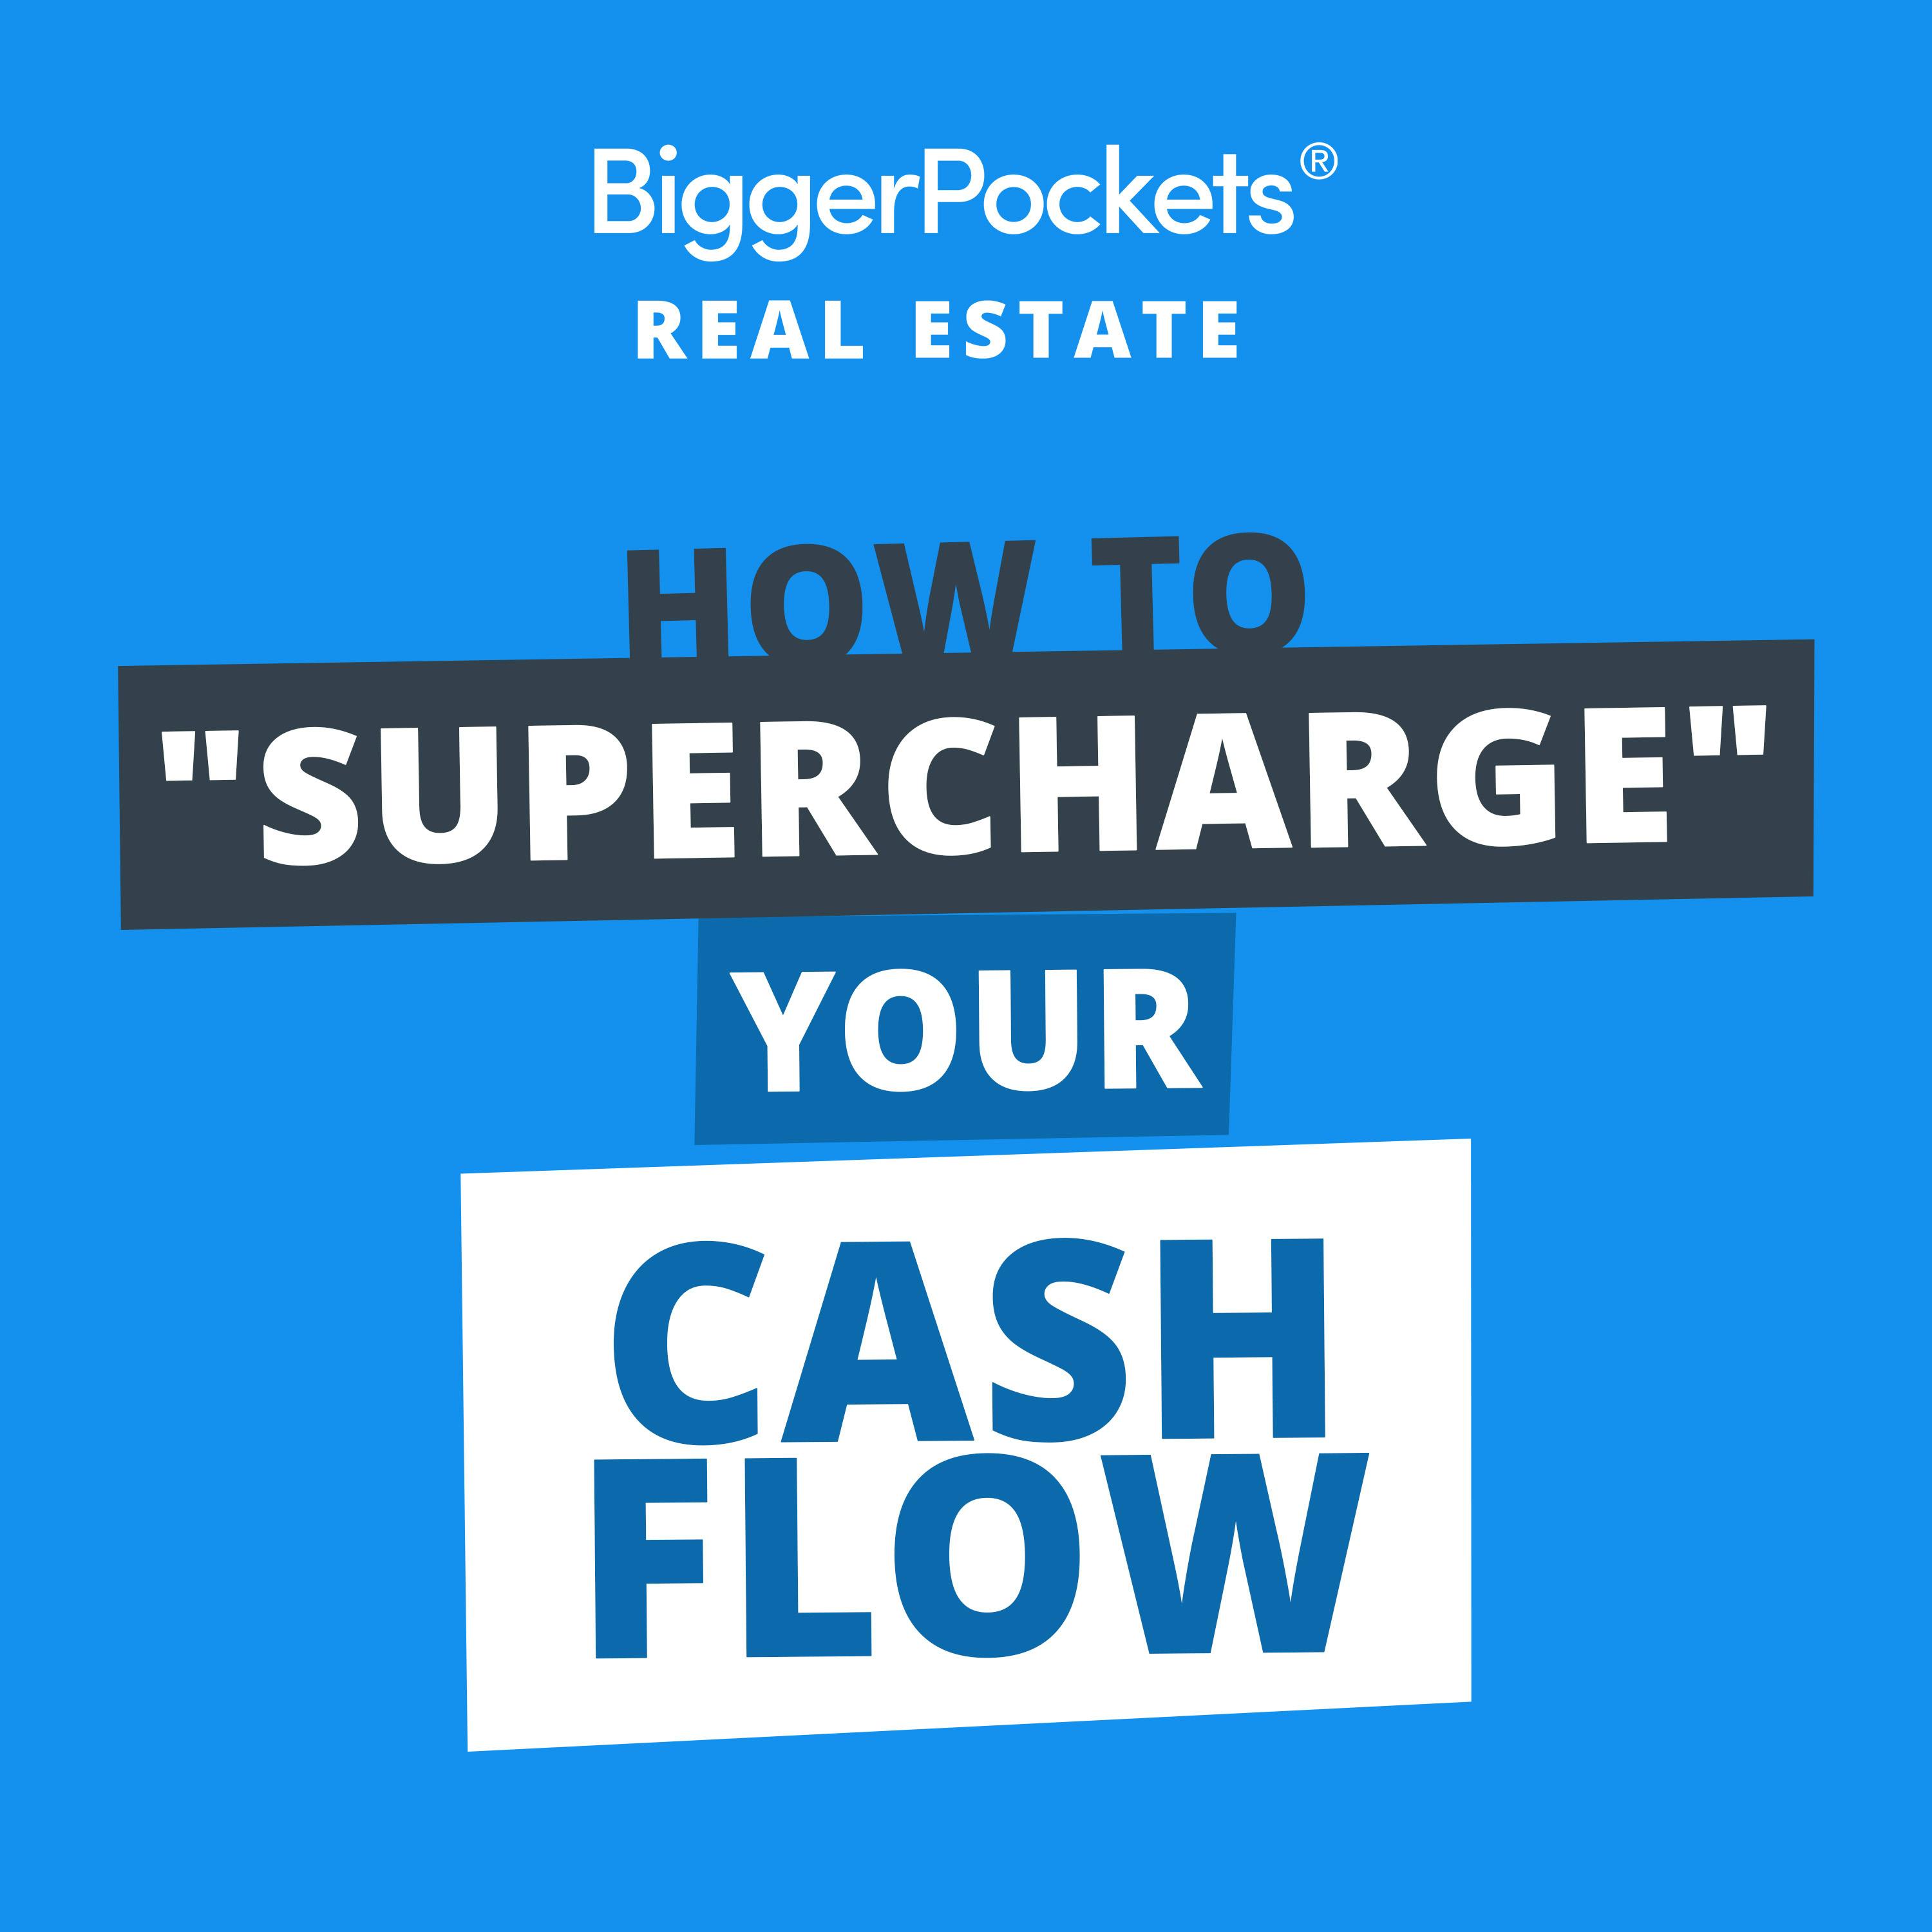 756: Seeing Greene: How to “Supercharge” Your Rental Property's Cash Flow in 2023